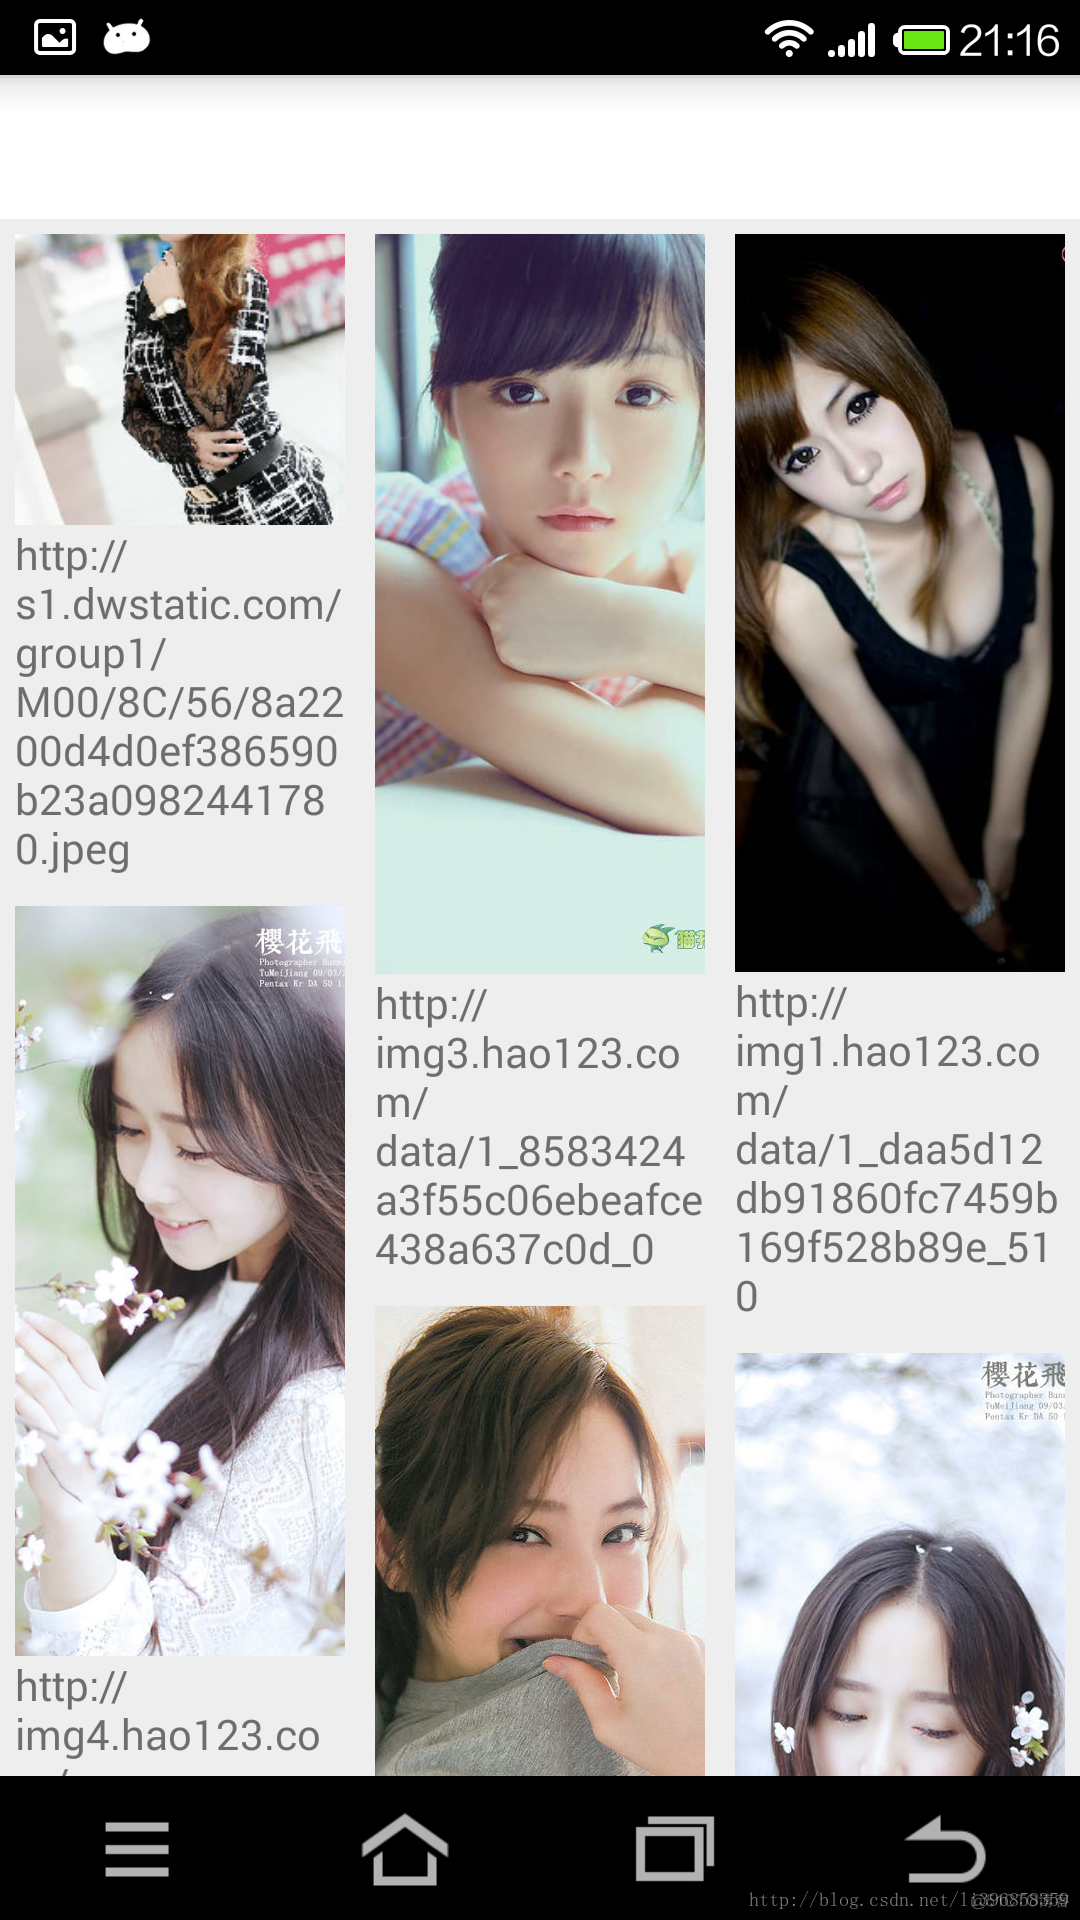 Android5.0 v7扩展包之RecyclerView_RecyclerView_08